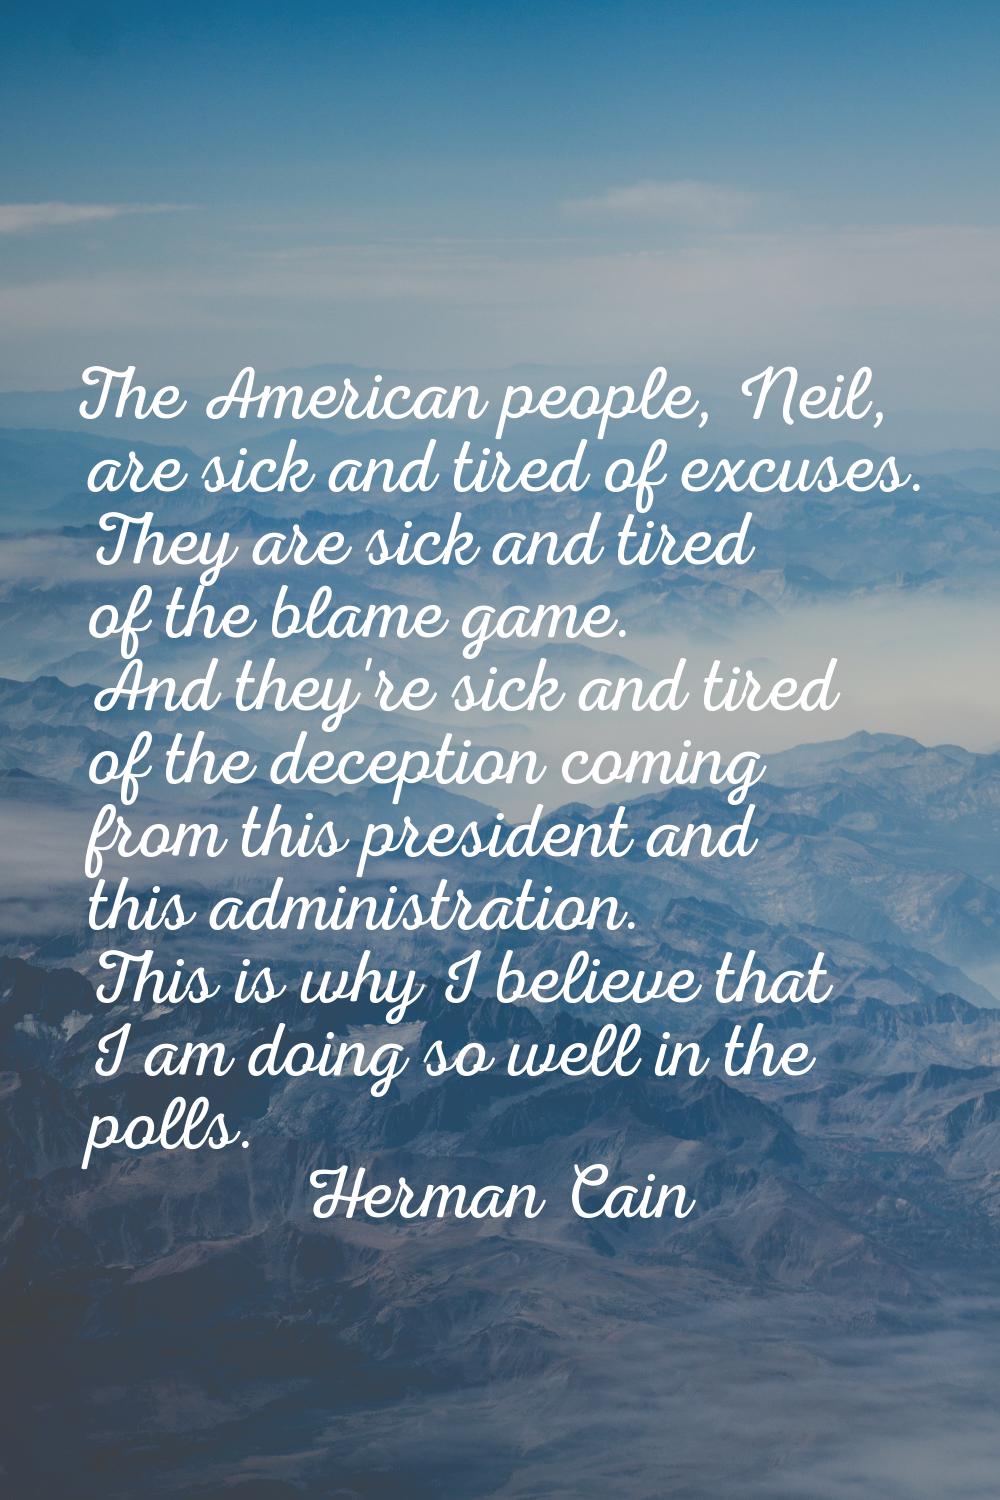 The American people, Neil, are sick and tired of excuses. They are sick and tired of the blame game